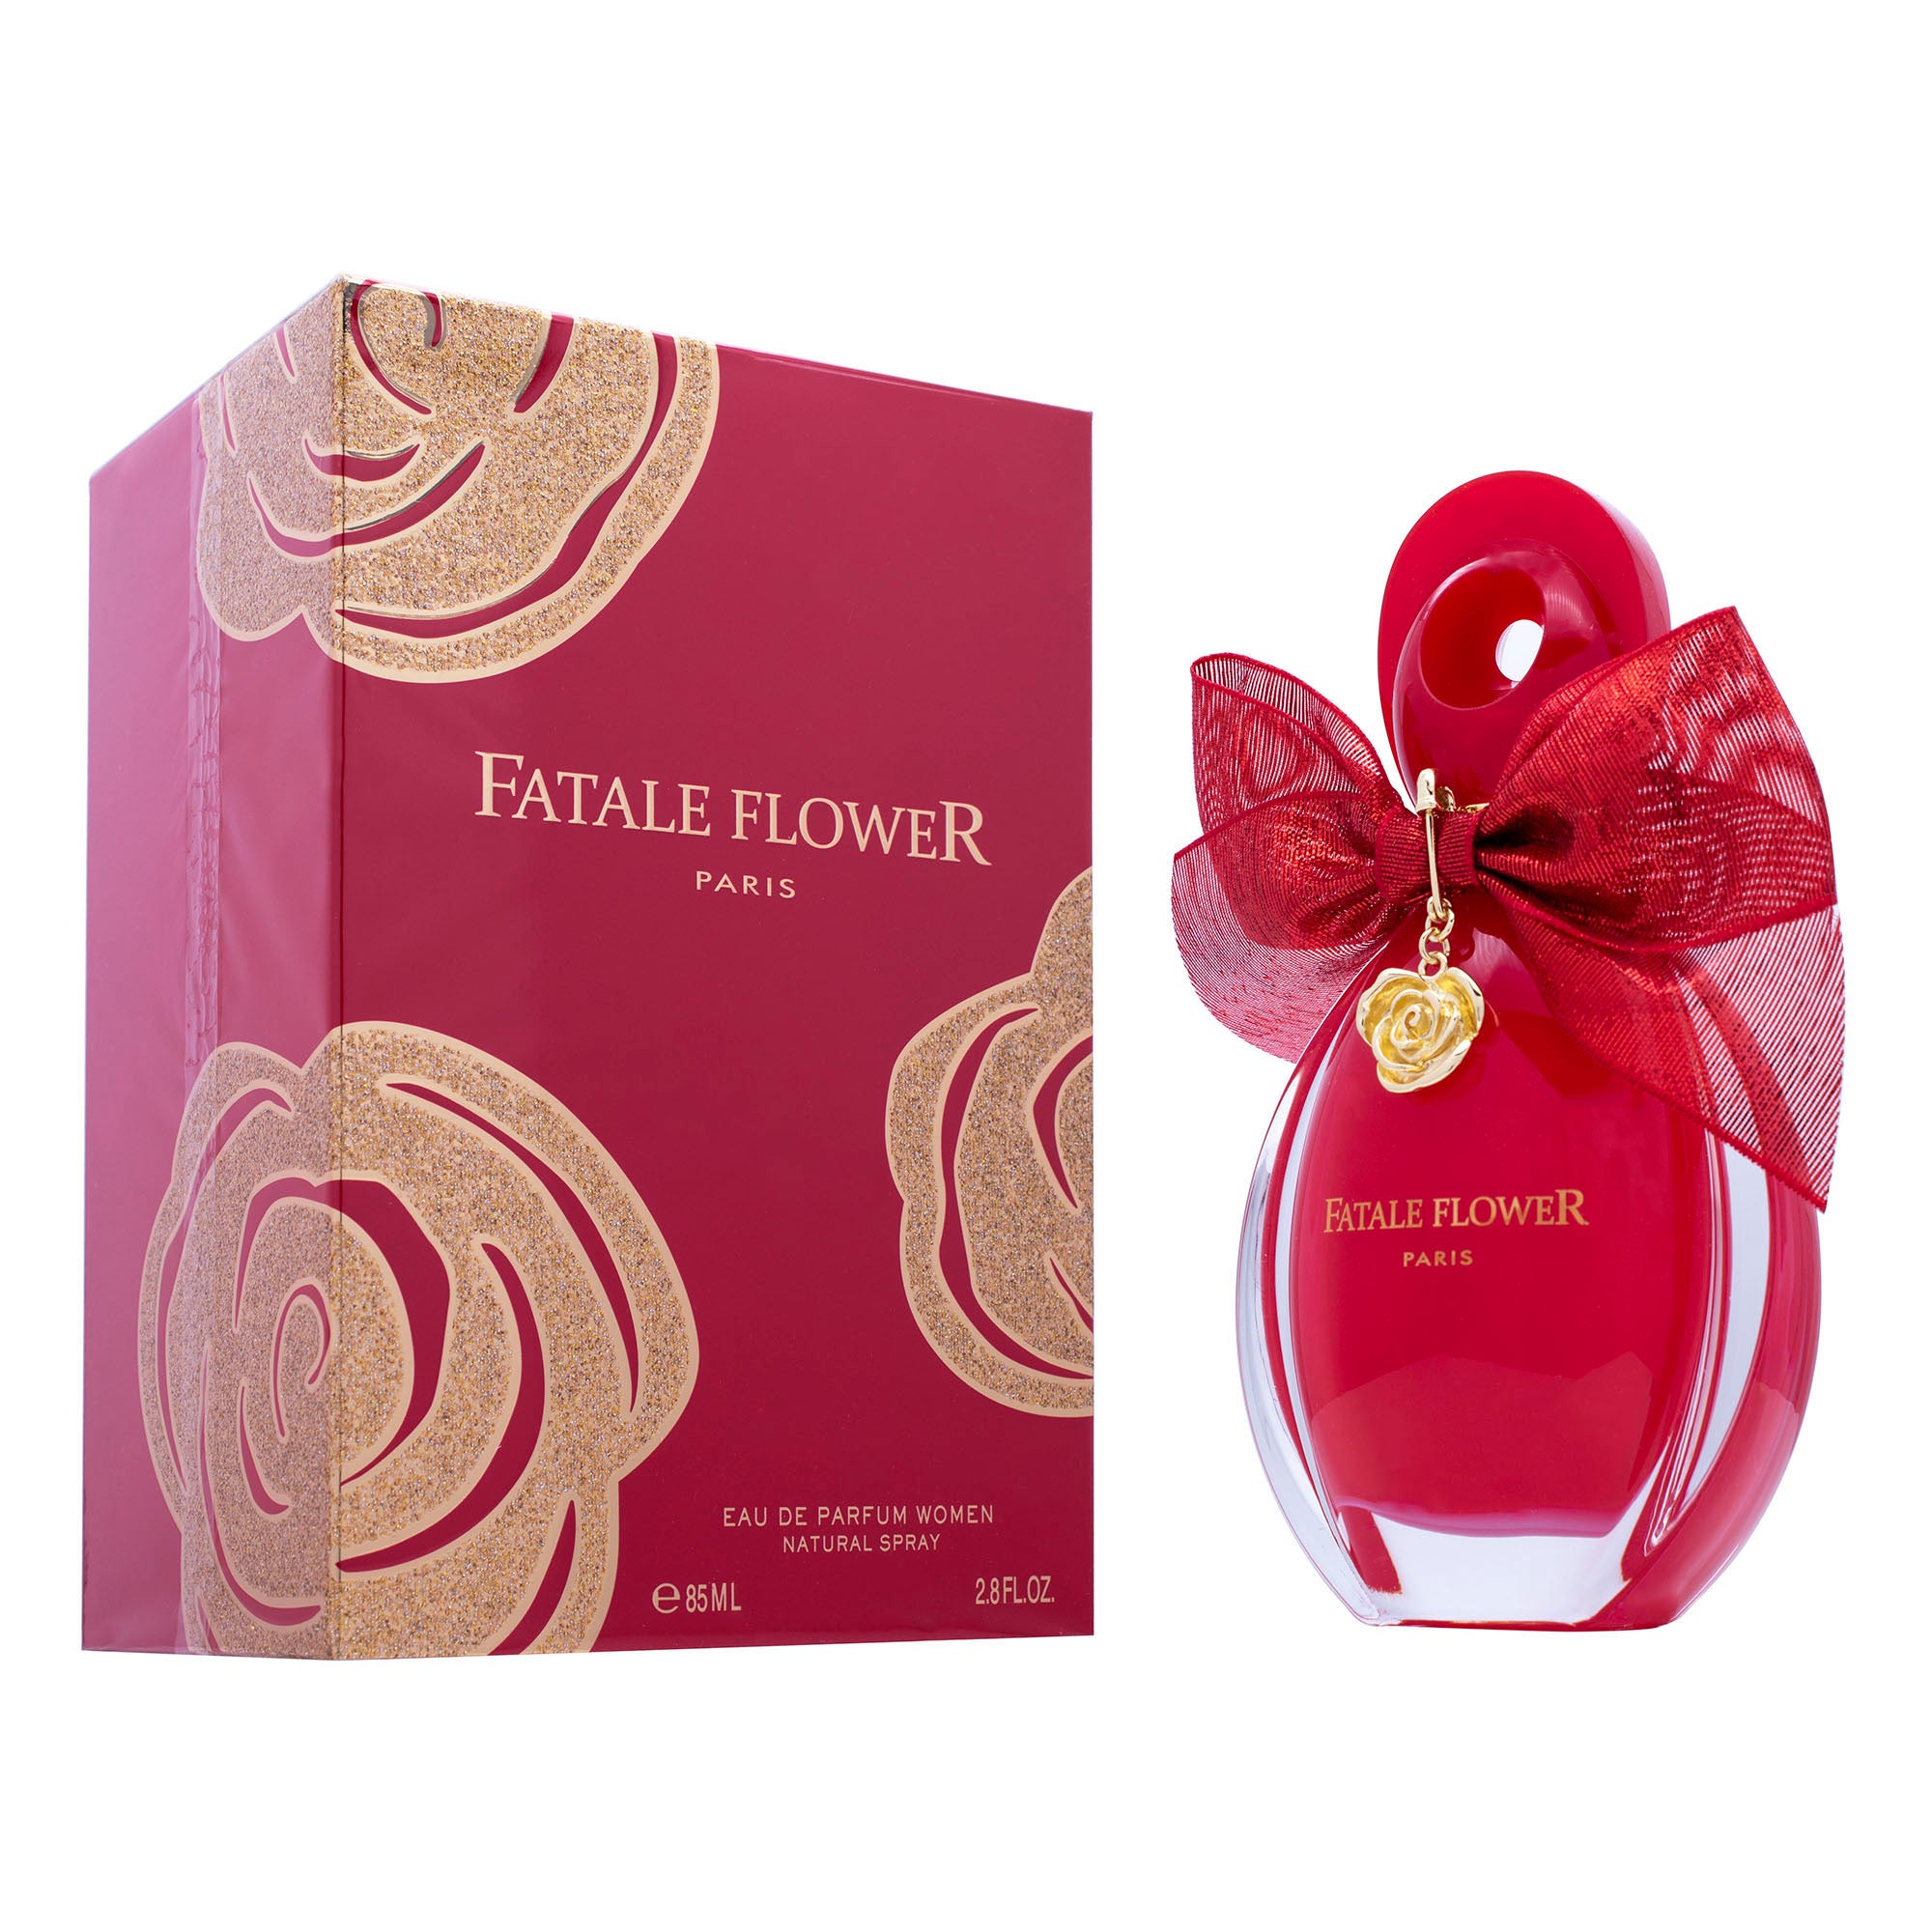 <span data-mce-fragment="1">Floral perfume - fruits for women. Top notes are pink pepper, pear, black currant and grapefruit; Middle notes are rose, jasmine, heliotrope and pineapple; The base notes are cedar, vanilla, amber, wood and patchouli.</span>